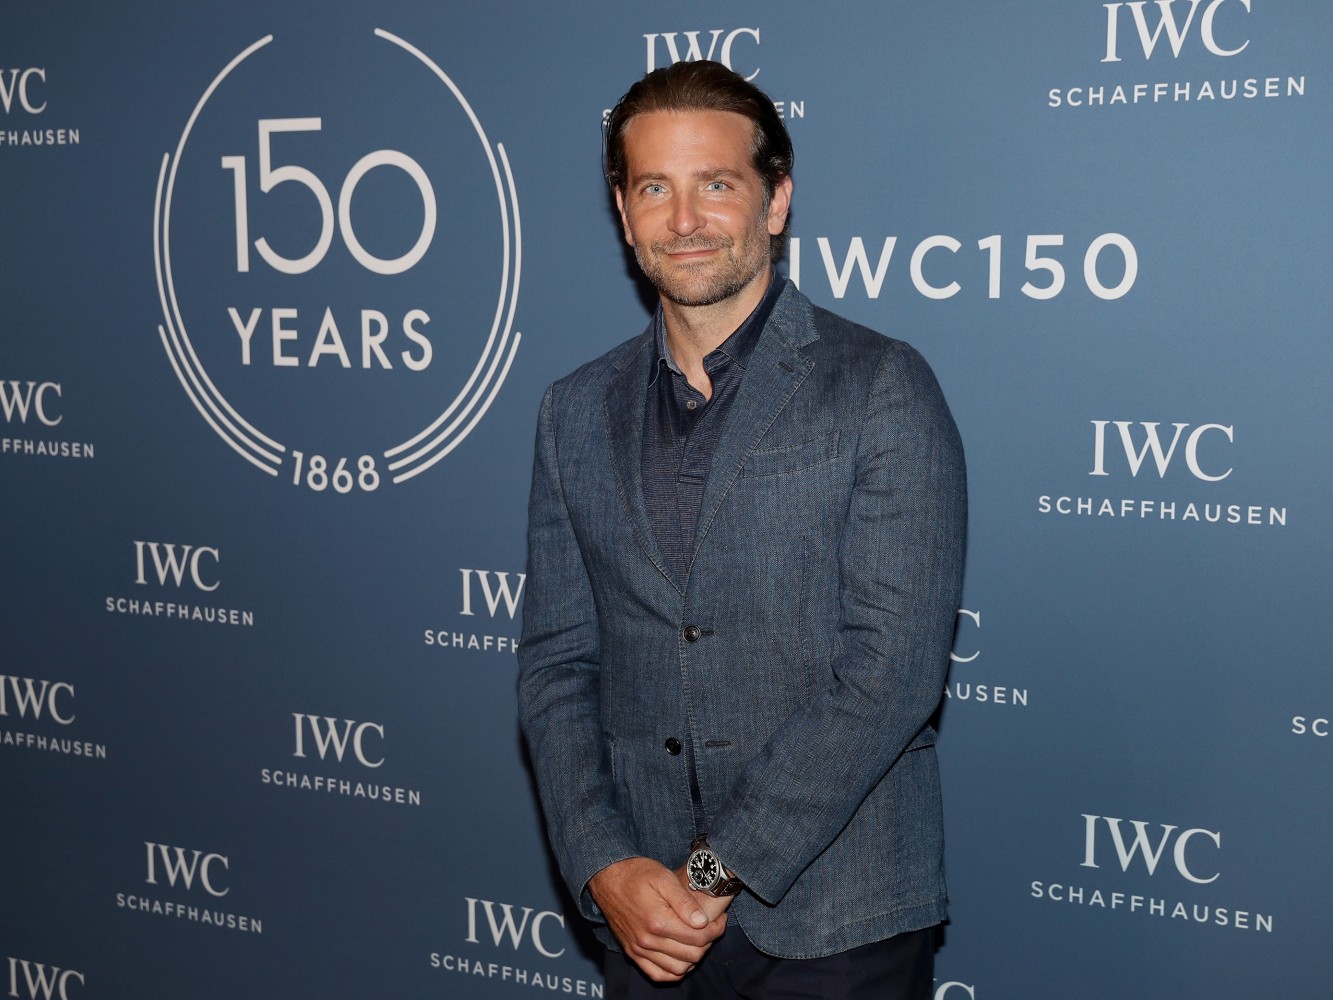 TimeZone : IWC » INDUSTRY NEWS - IWC and Bradley Cooper Charity